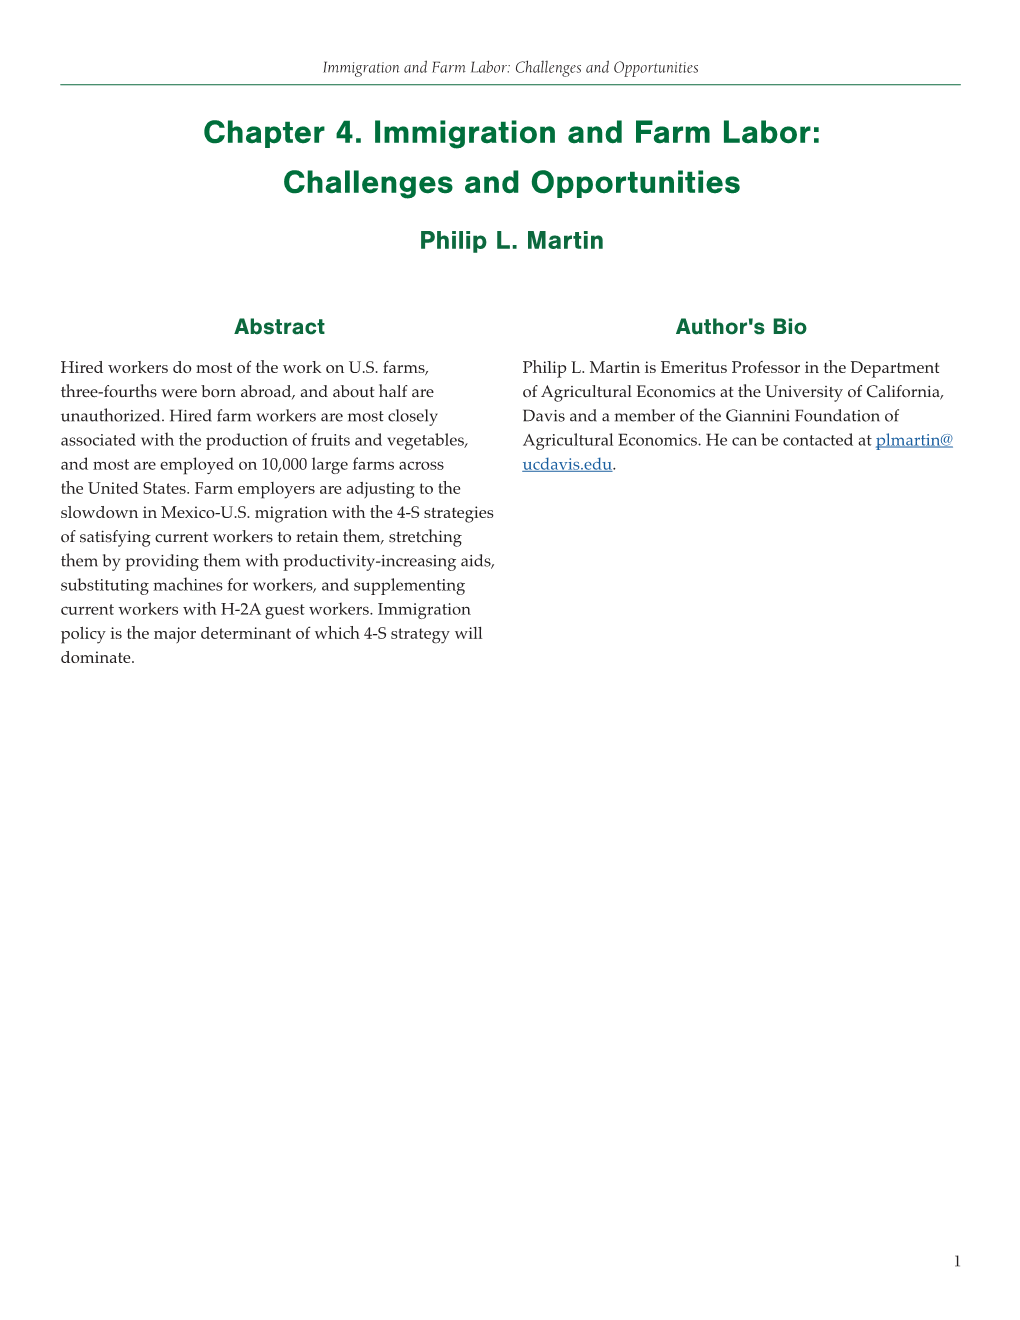 Chapter 4. Immigration and Farm Labor: Challenges and Opportunities